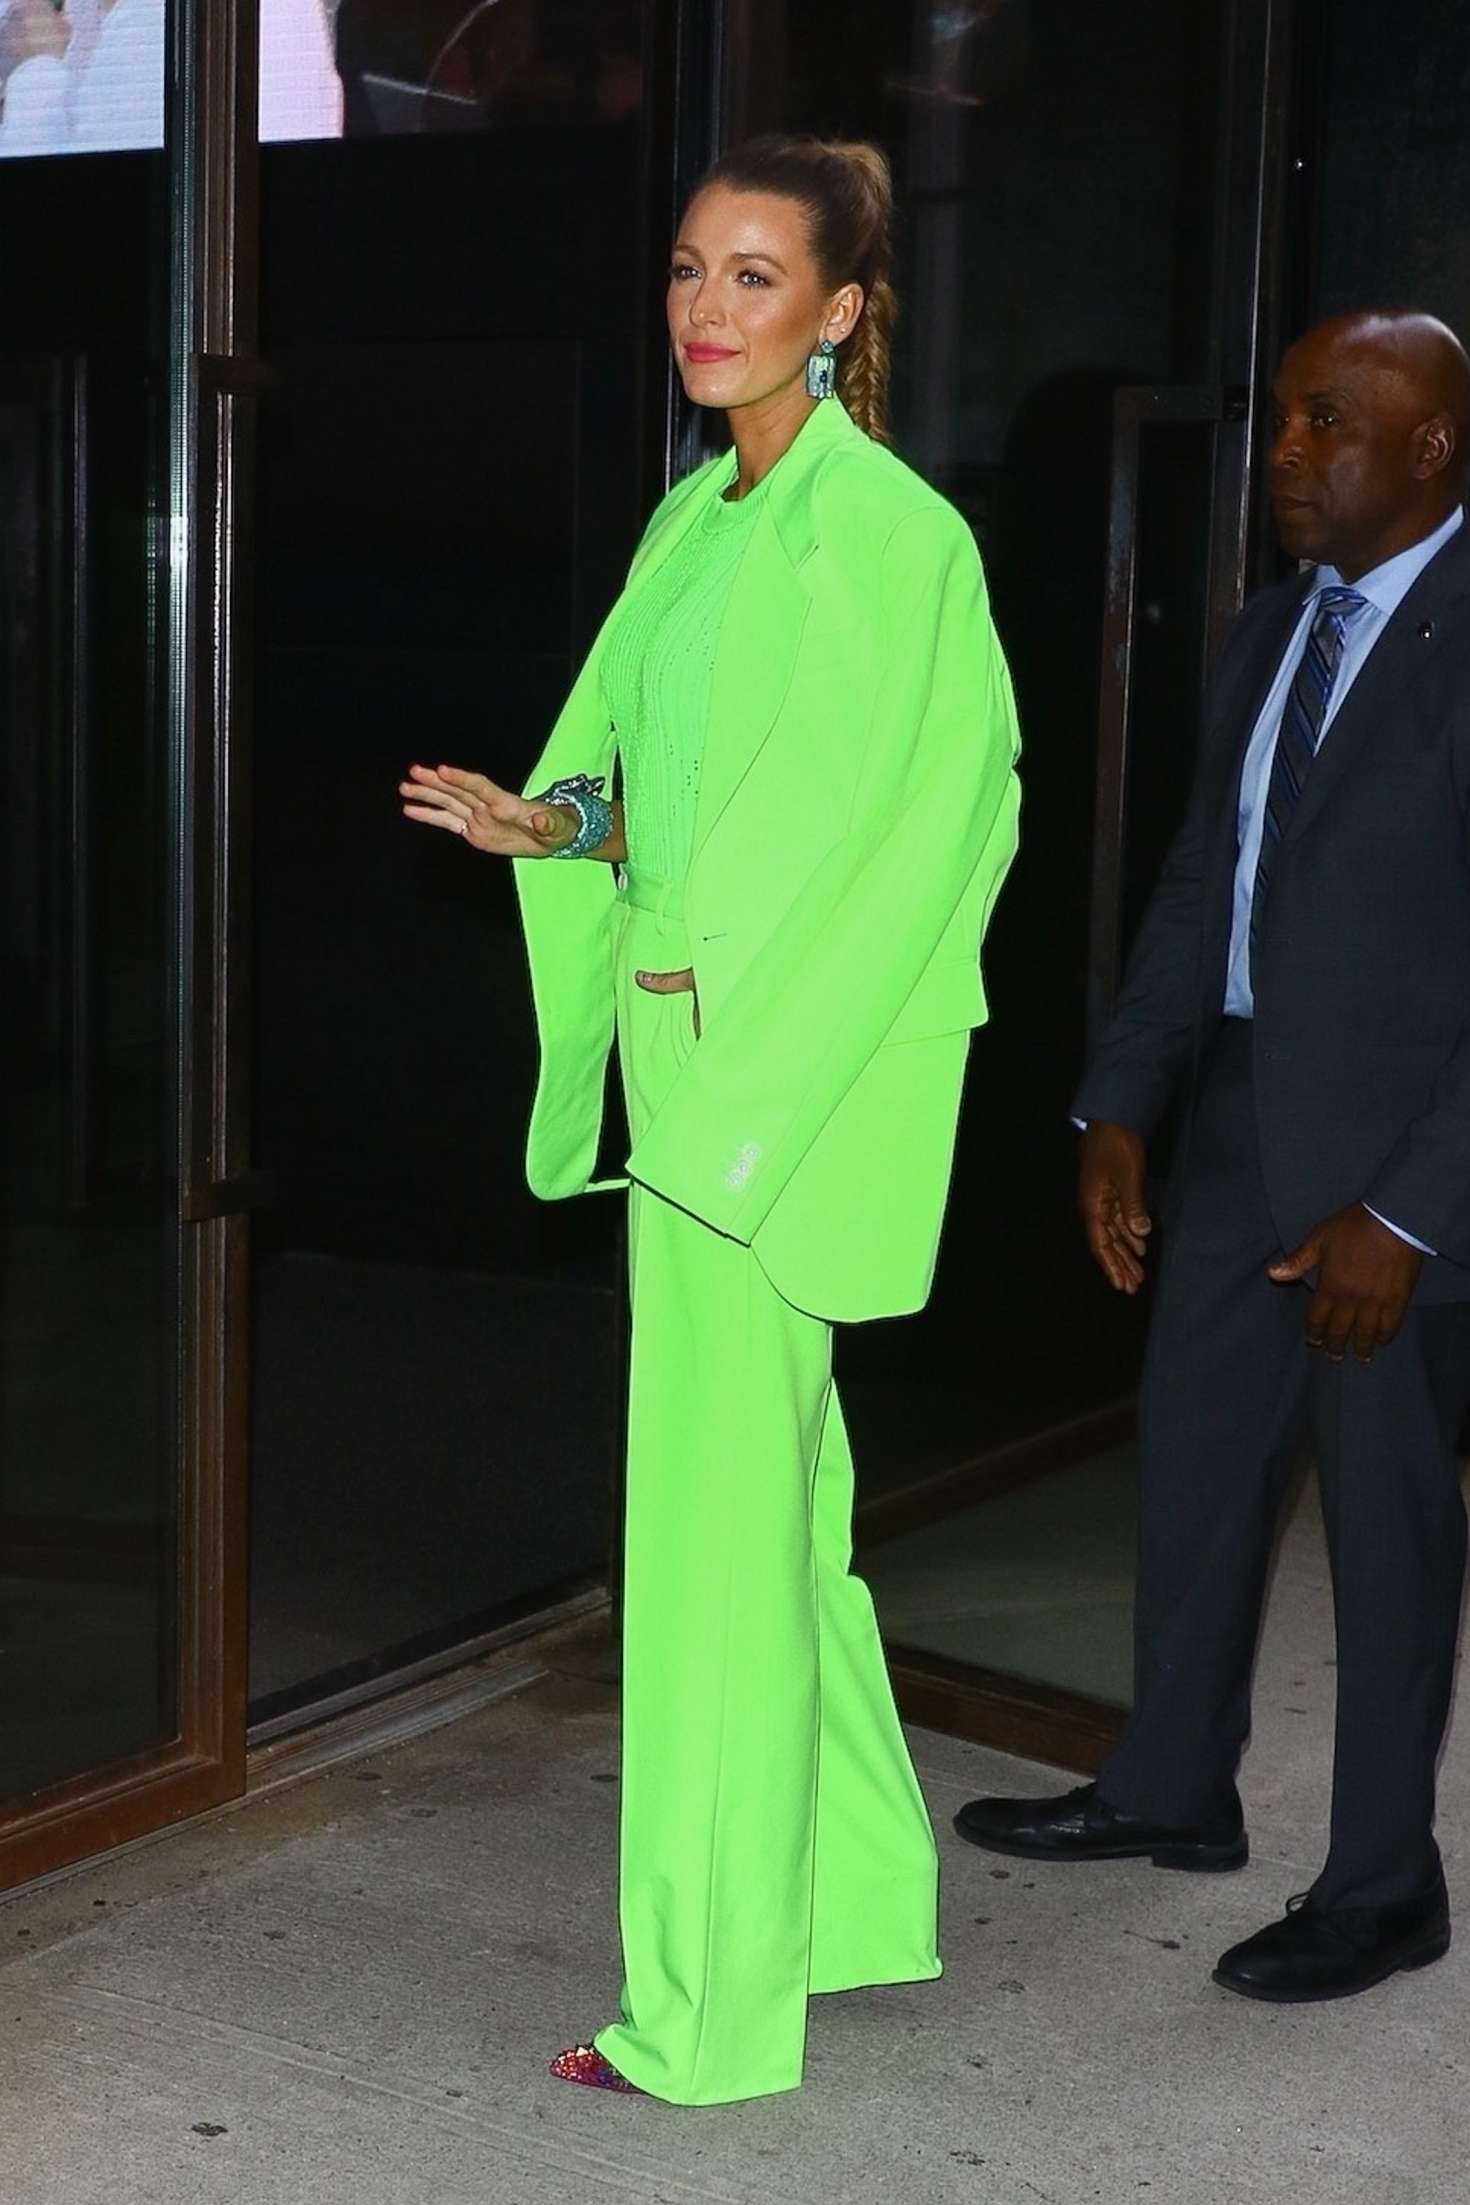 Blake Lively in Neon Green Suit at Spring Studios in New York City